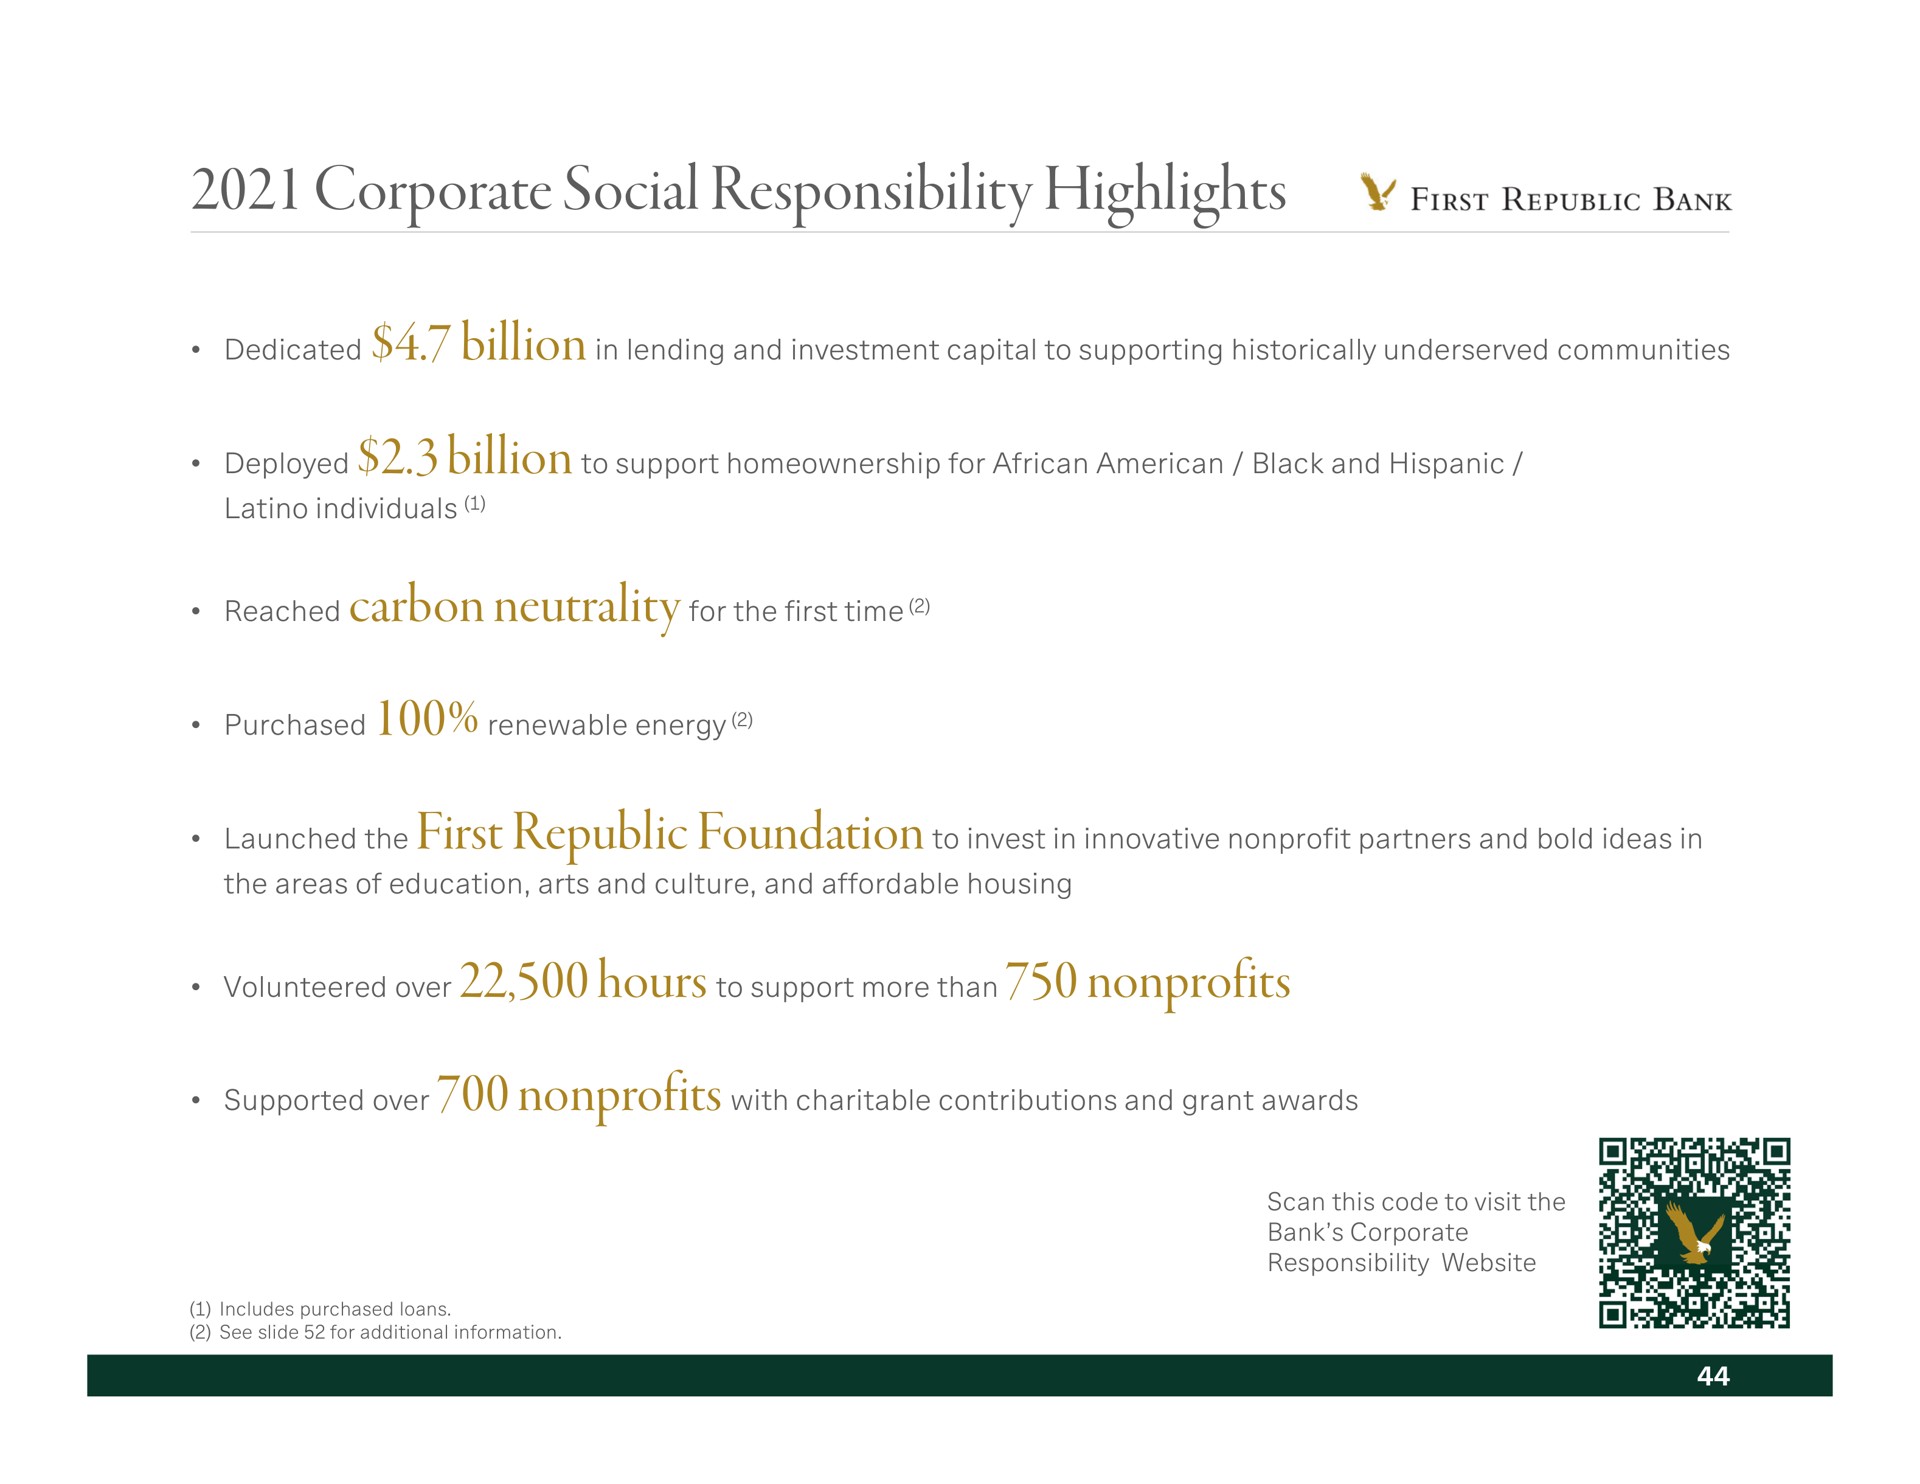 corporate social responsibility highlights reached carbon neutrality for the first time | First Republic Bank